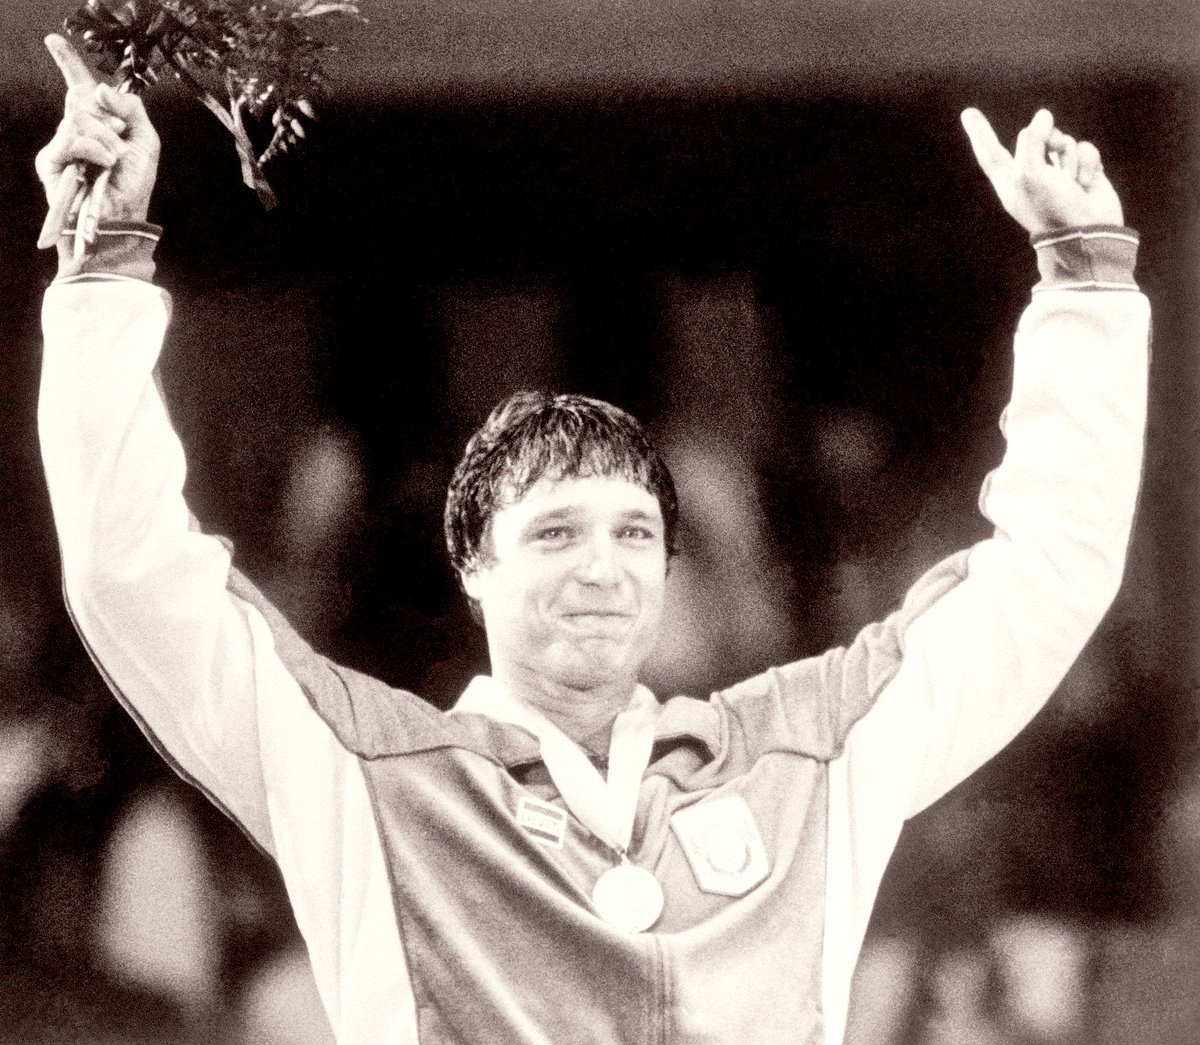 #138In 1982, Jeff Blatnick was diagnosed with Hodgkin's lymphomaAfter radiation therapy helped to hold the cancer in remission, Blatnick competed in and won a gold medal in the 1984 games thus becoming the first American to ever win gold in Greco-Roman in Olympics